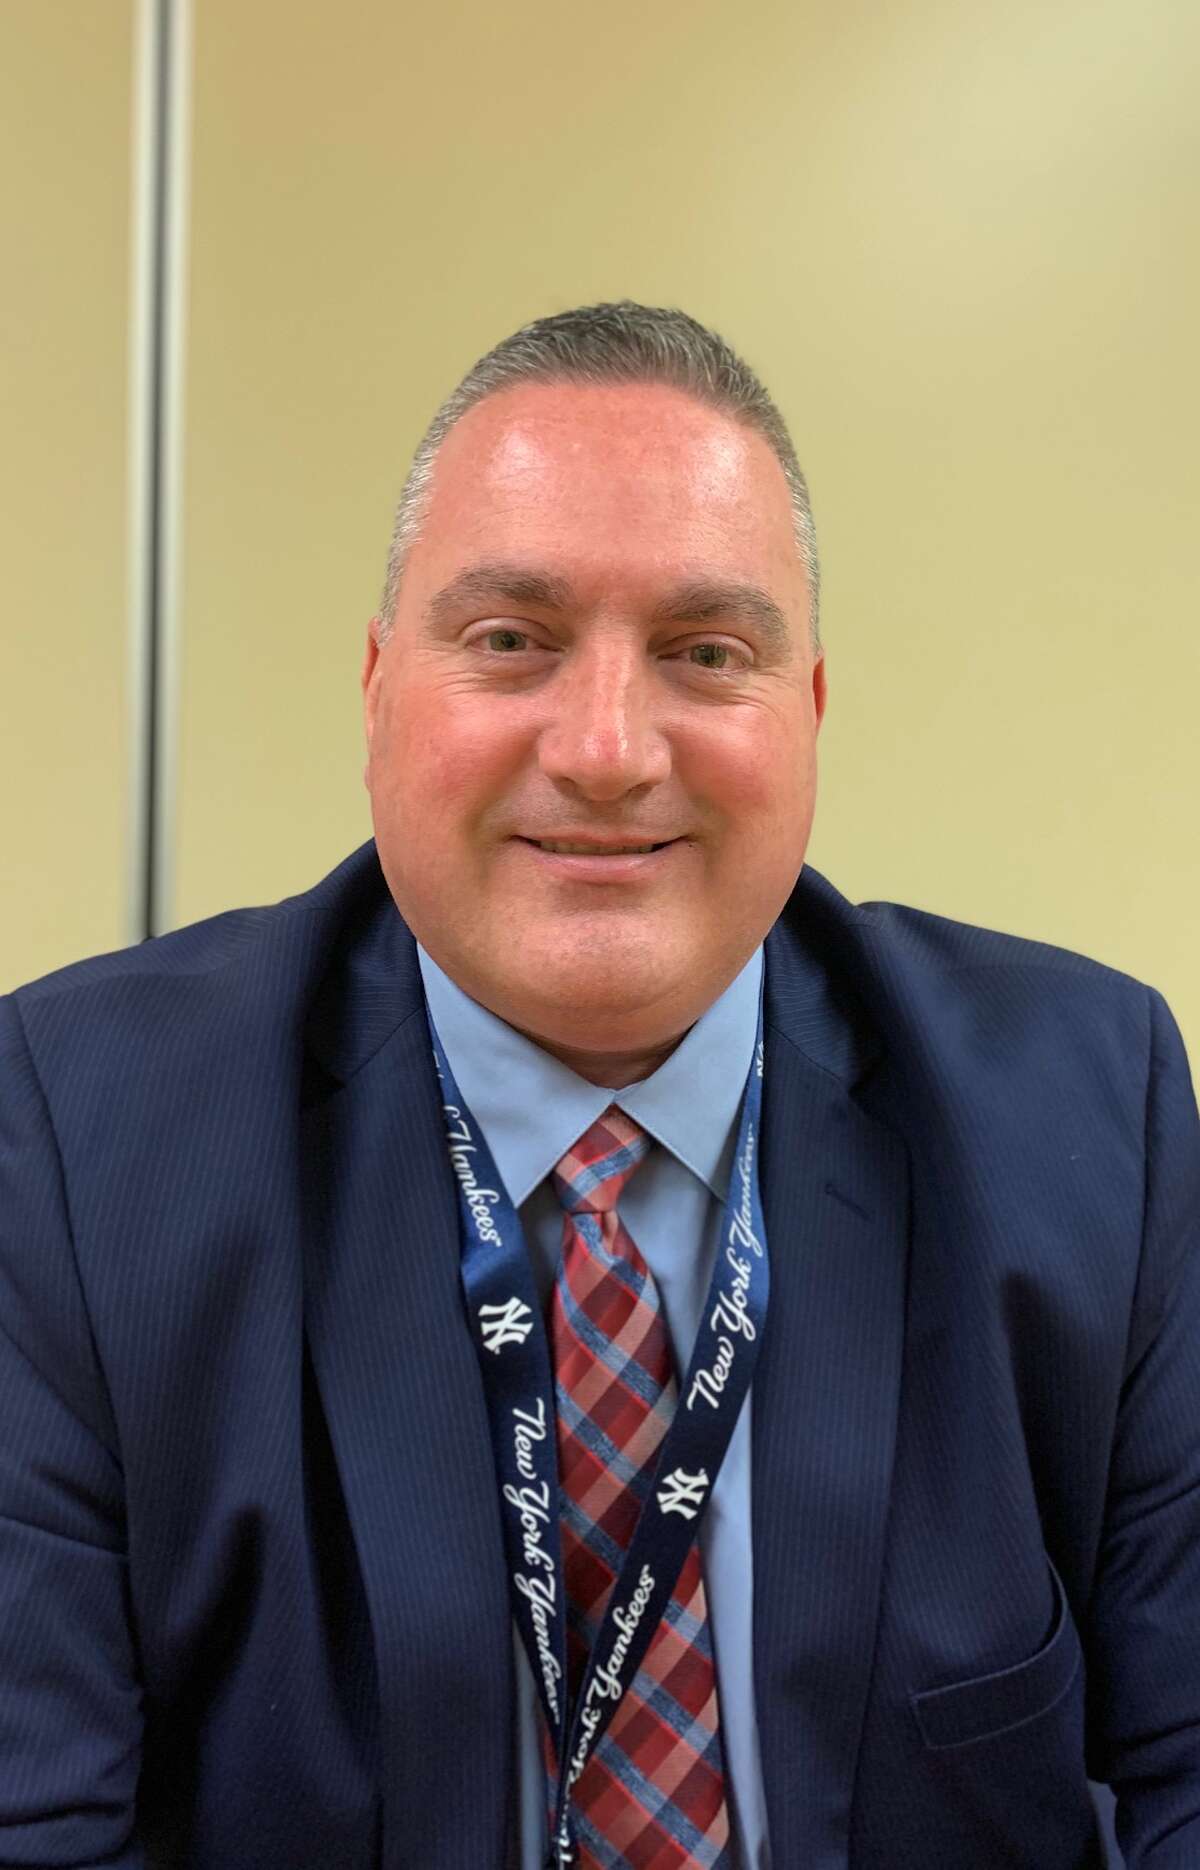 Dr. David Perry, a longtime teacher and administrator at South Colonie schools, has been selected to lead the district.